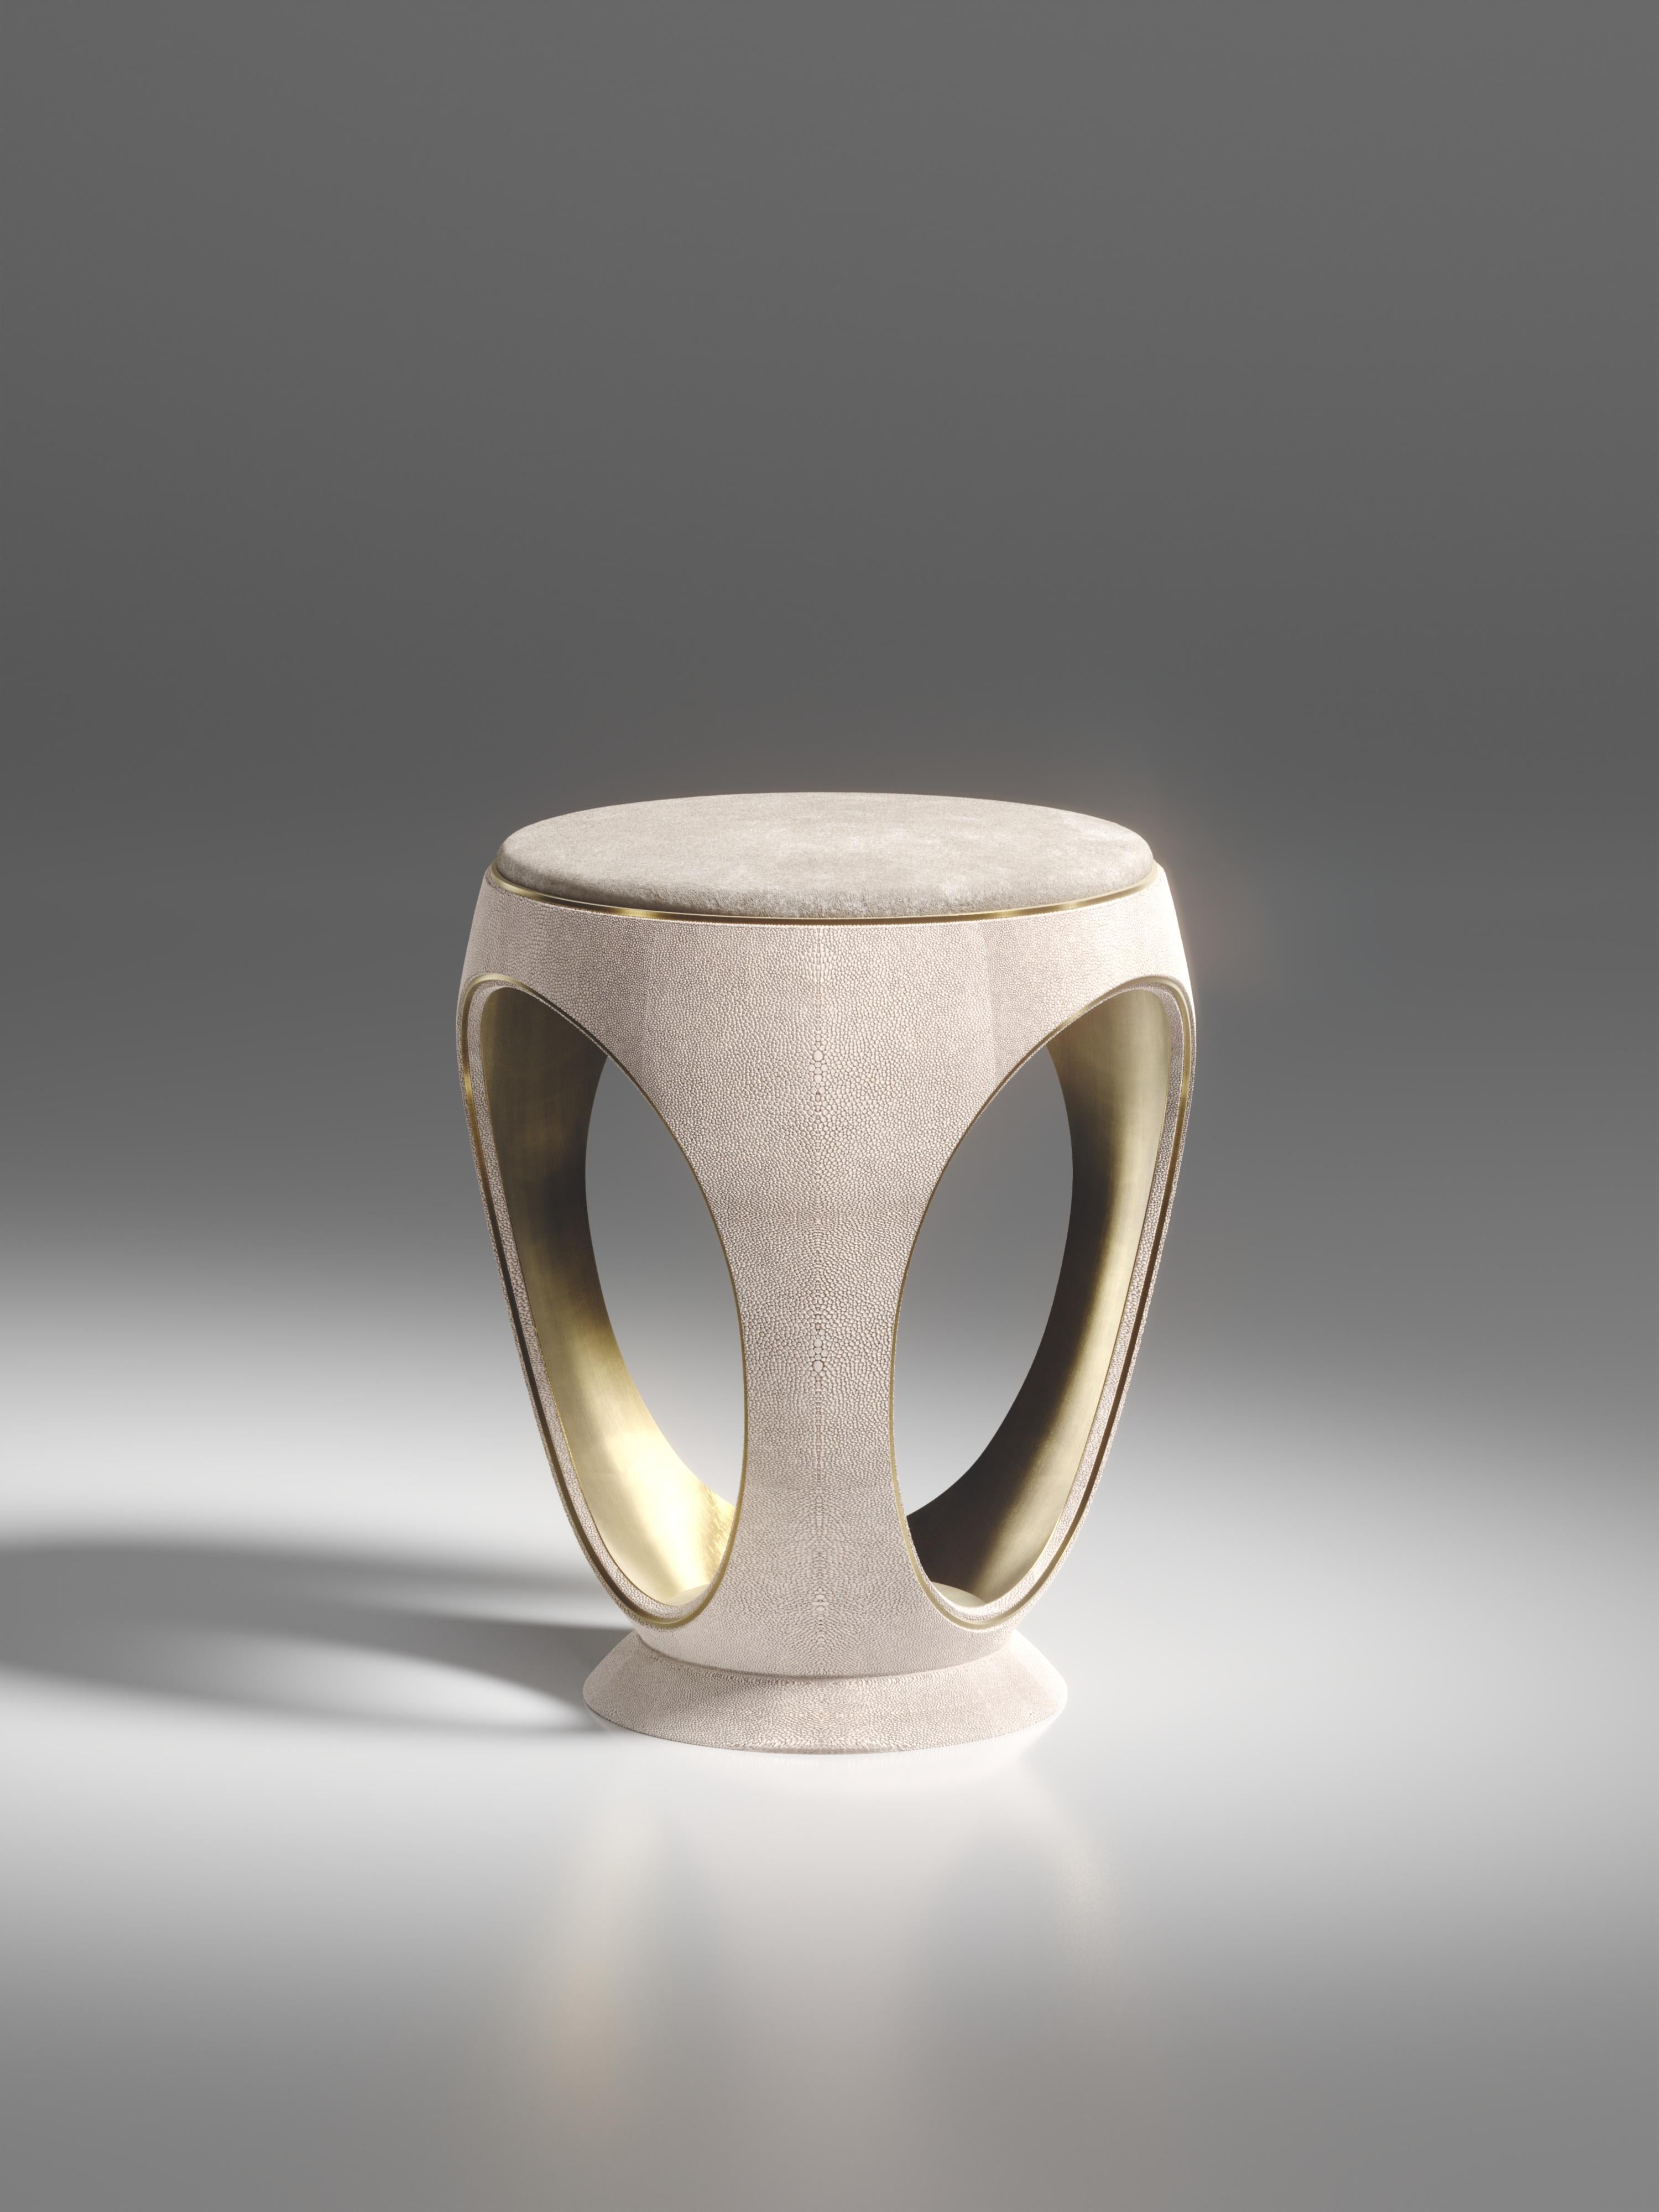 The ring stool in cream shagreen is one of the most iconic pieces of the R&Y Augousti Collection. A Sculptural, jewel-like shape, this piece has been revamped with a discreet bronze-patina brass indentation detail on the exterior, as well as the